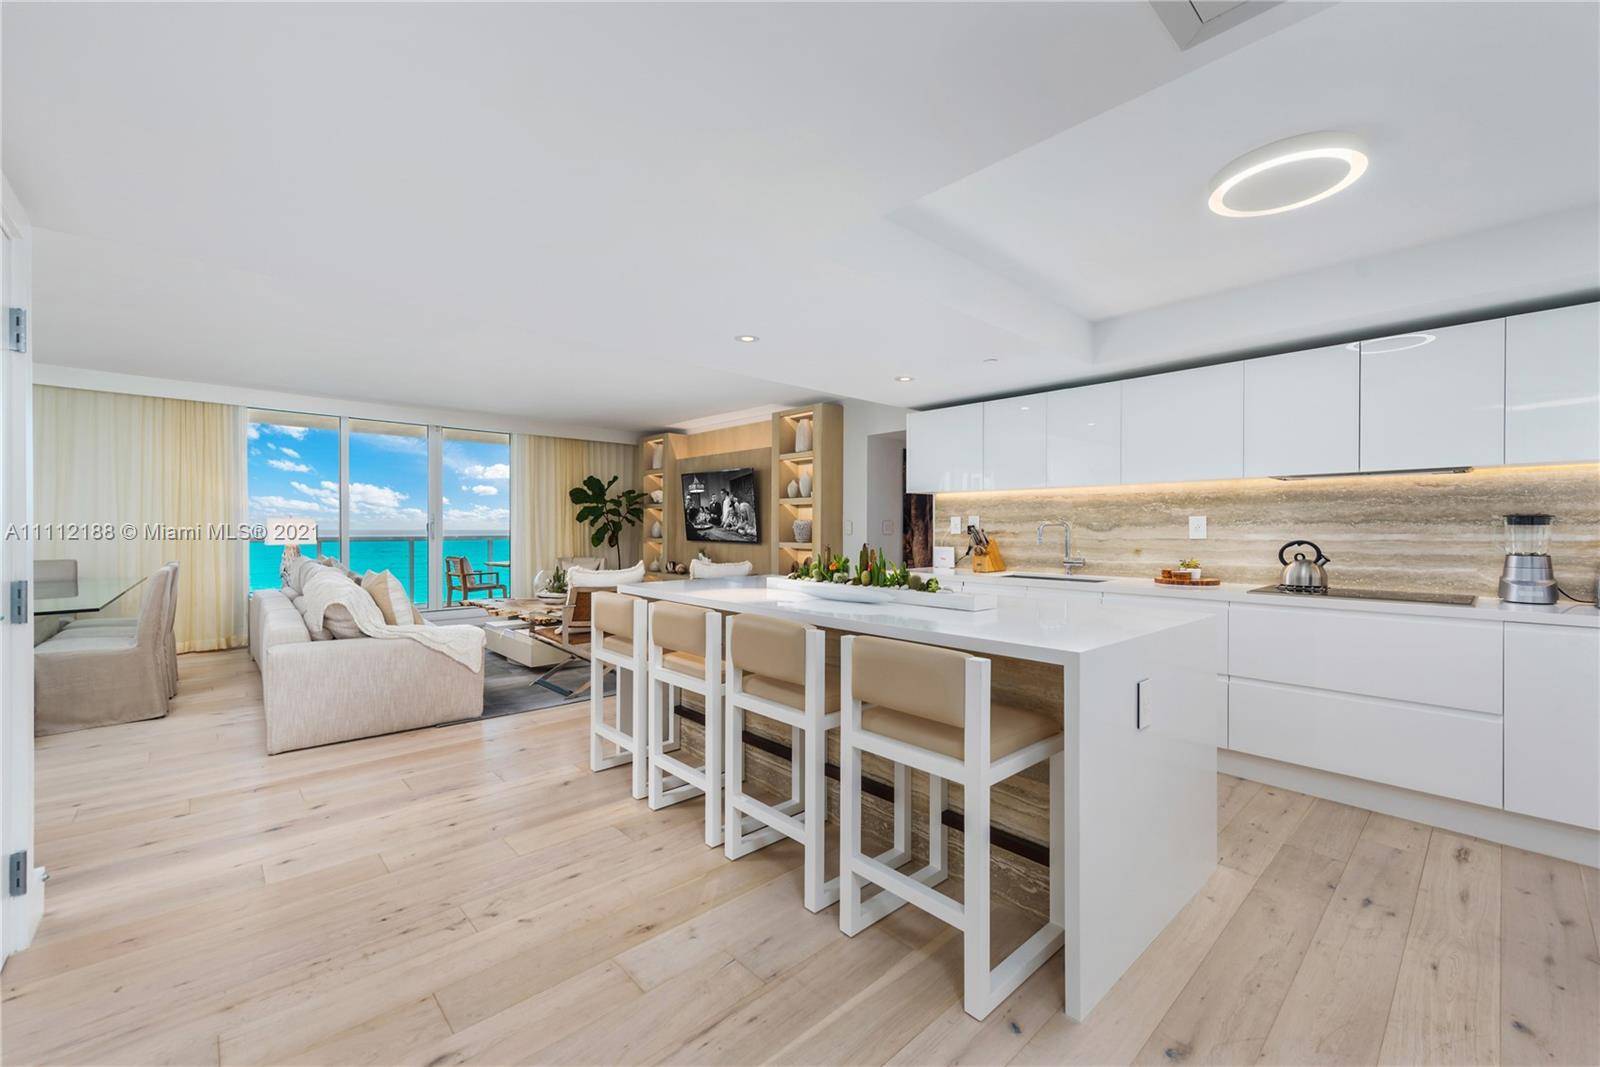 This beachfront private residence is nestled in Miami s first eco conscious hotel, with their belief being that sustainable hotels are the future and those who travel the world also ...